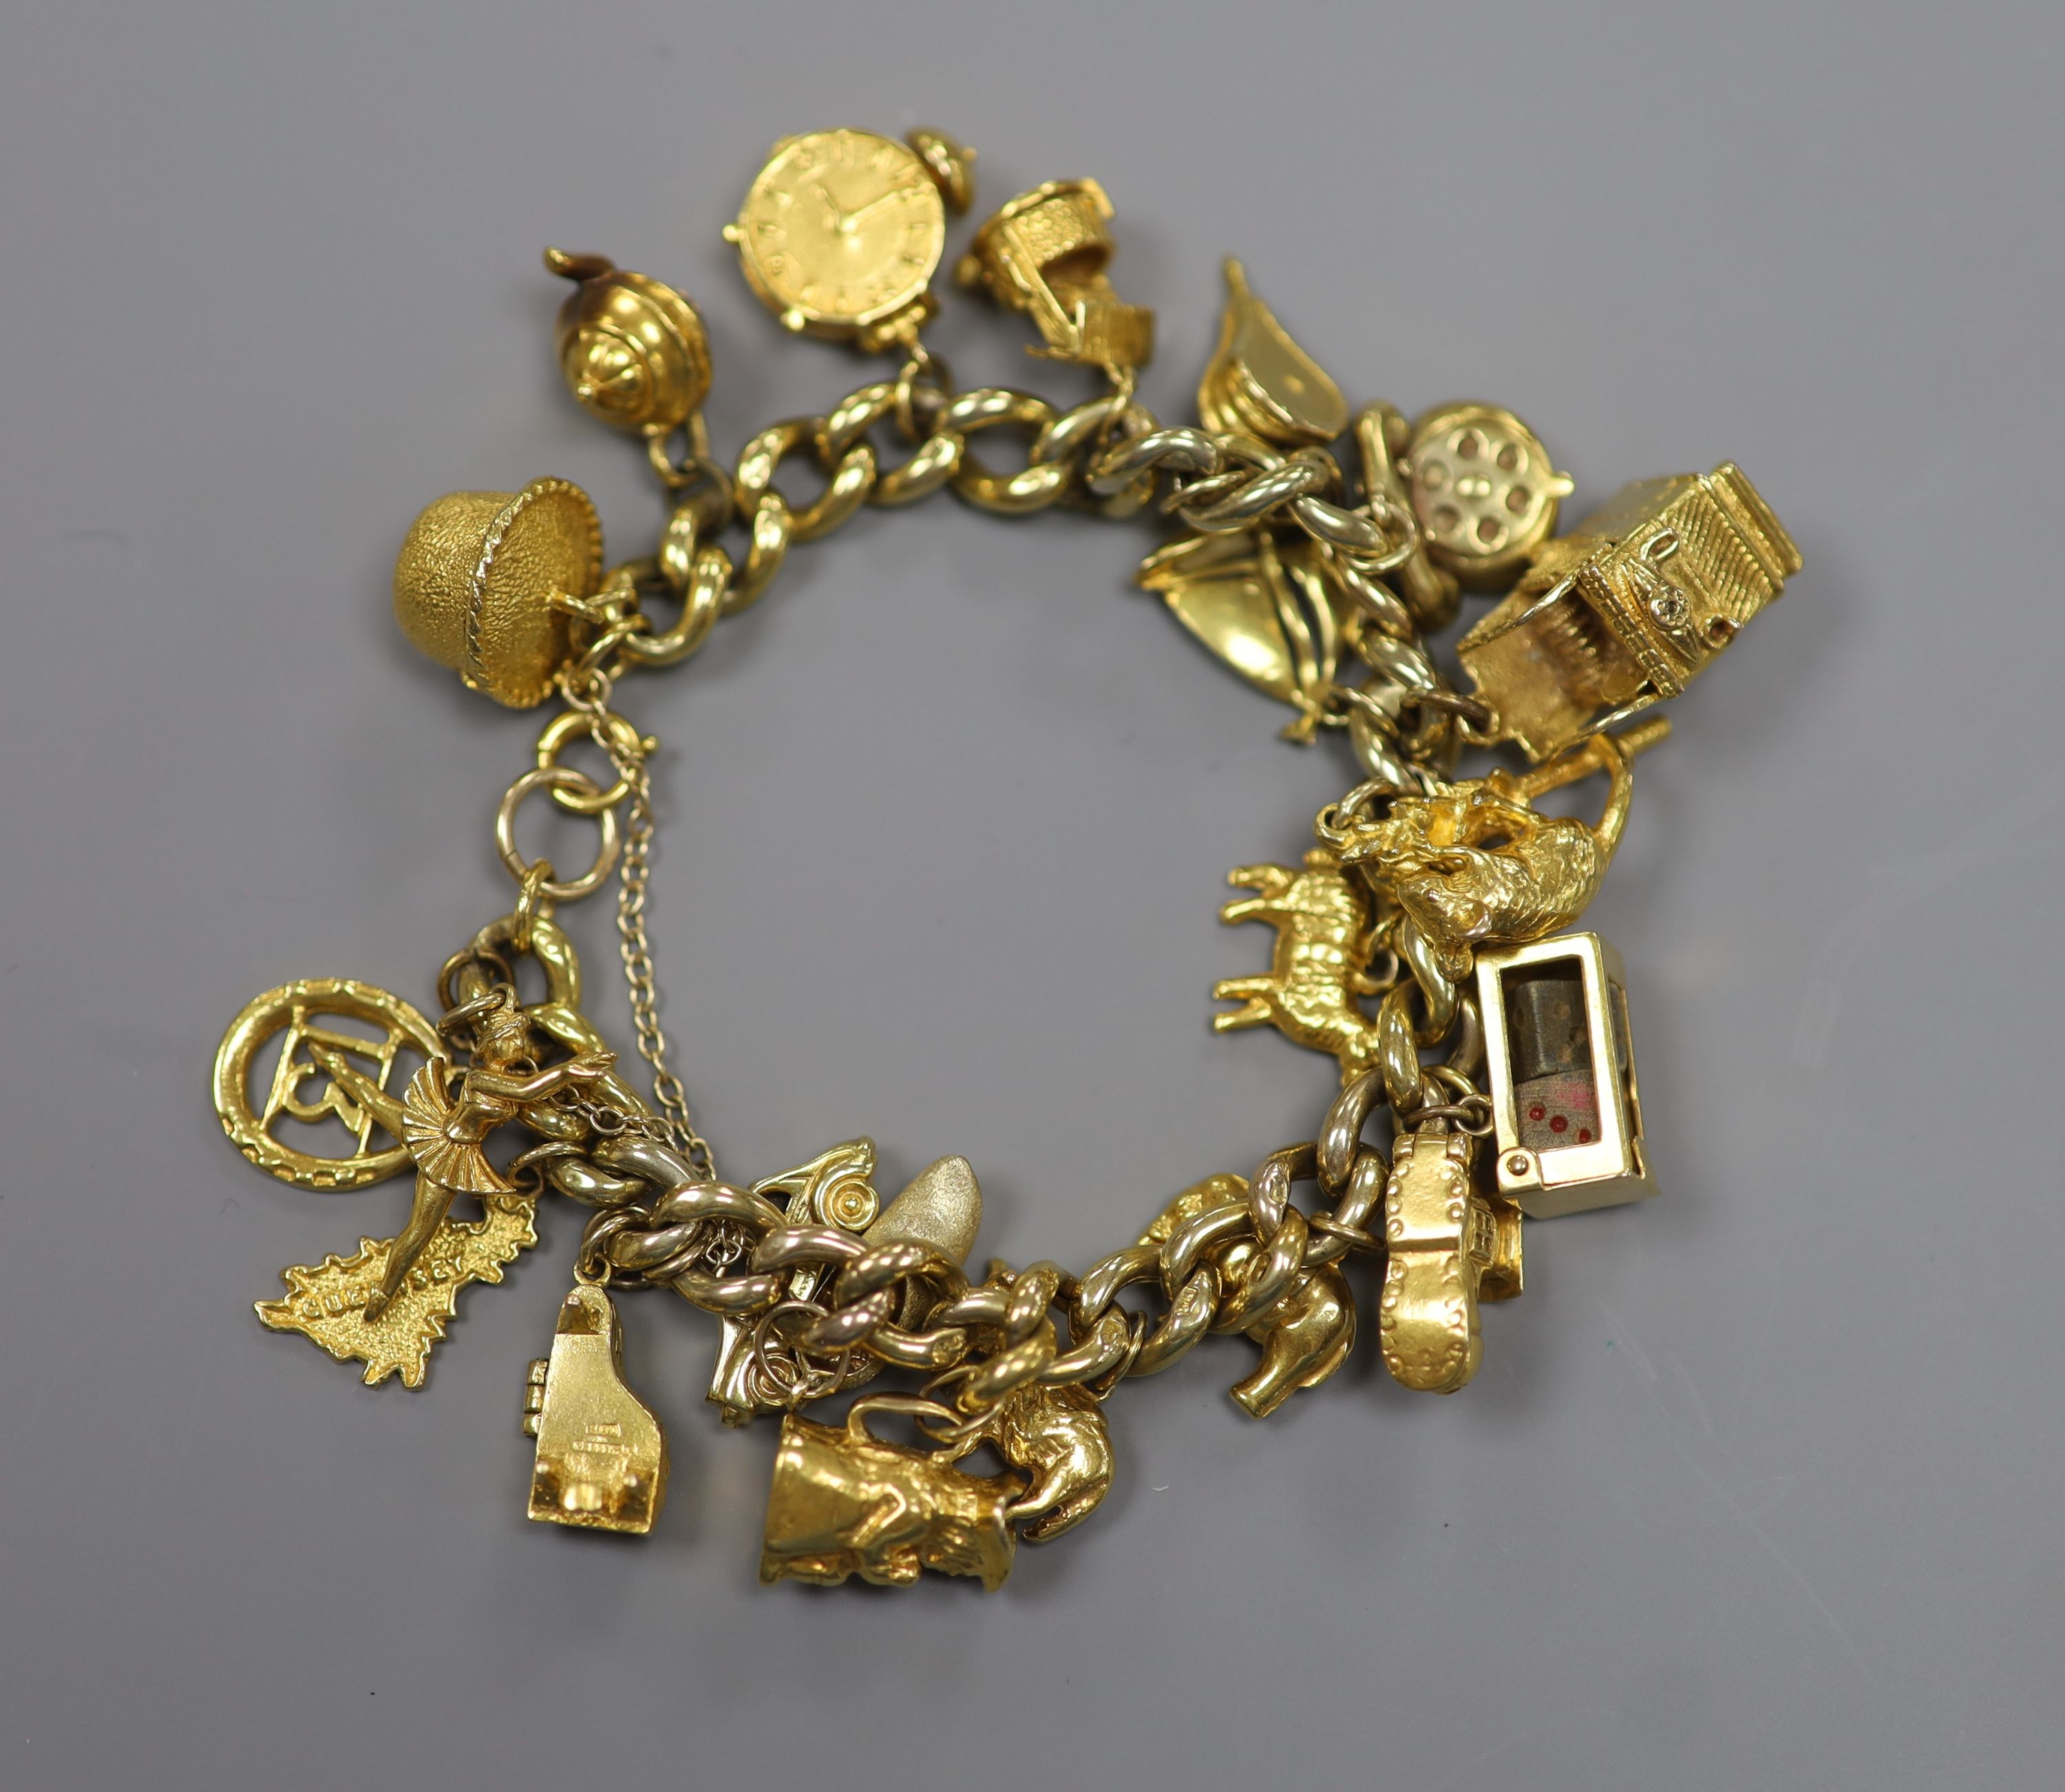 A 9ct curb link charm bracelet hung with twenty one assorted mainly 9ct gold charms